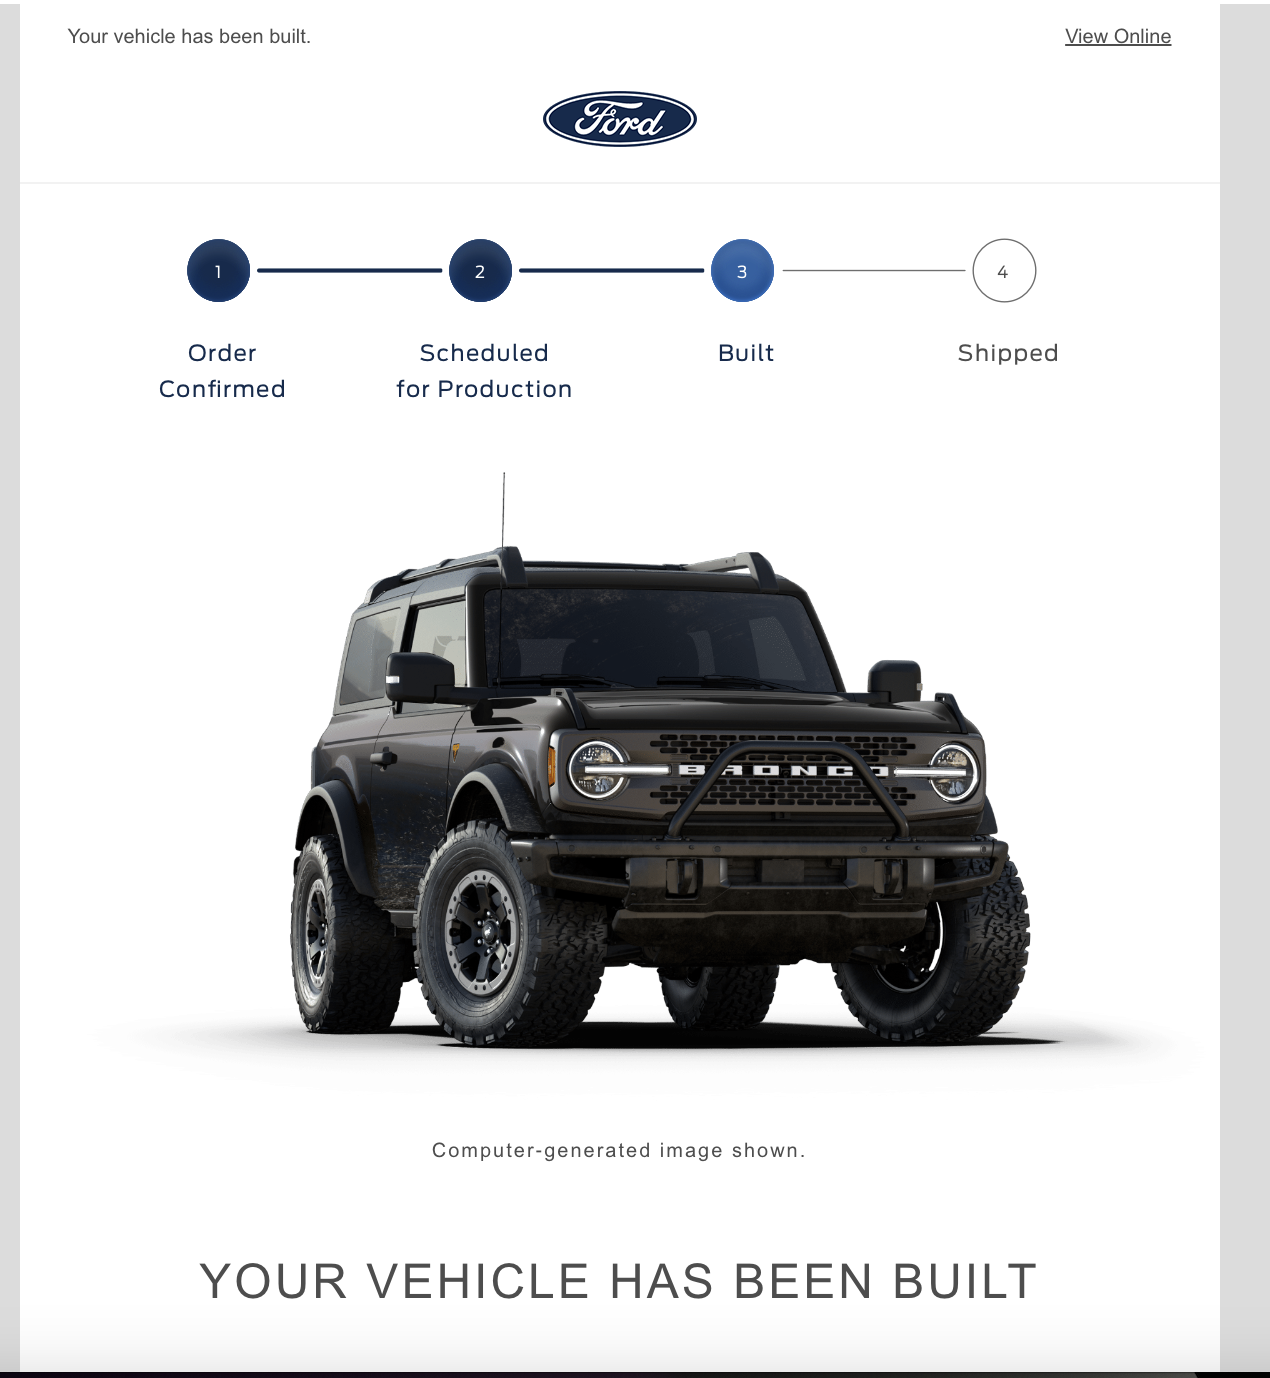 Ford Bronco The Plan & Offer - Stephens Auto Center's Mid Atlantic Bronco Connection Screenshot 2022-12-11 at 12.11.49 PM